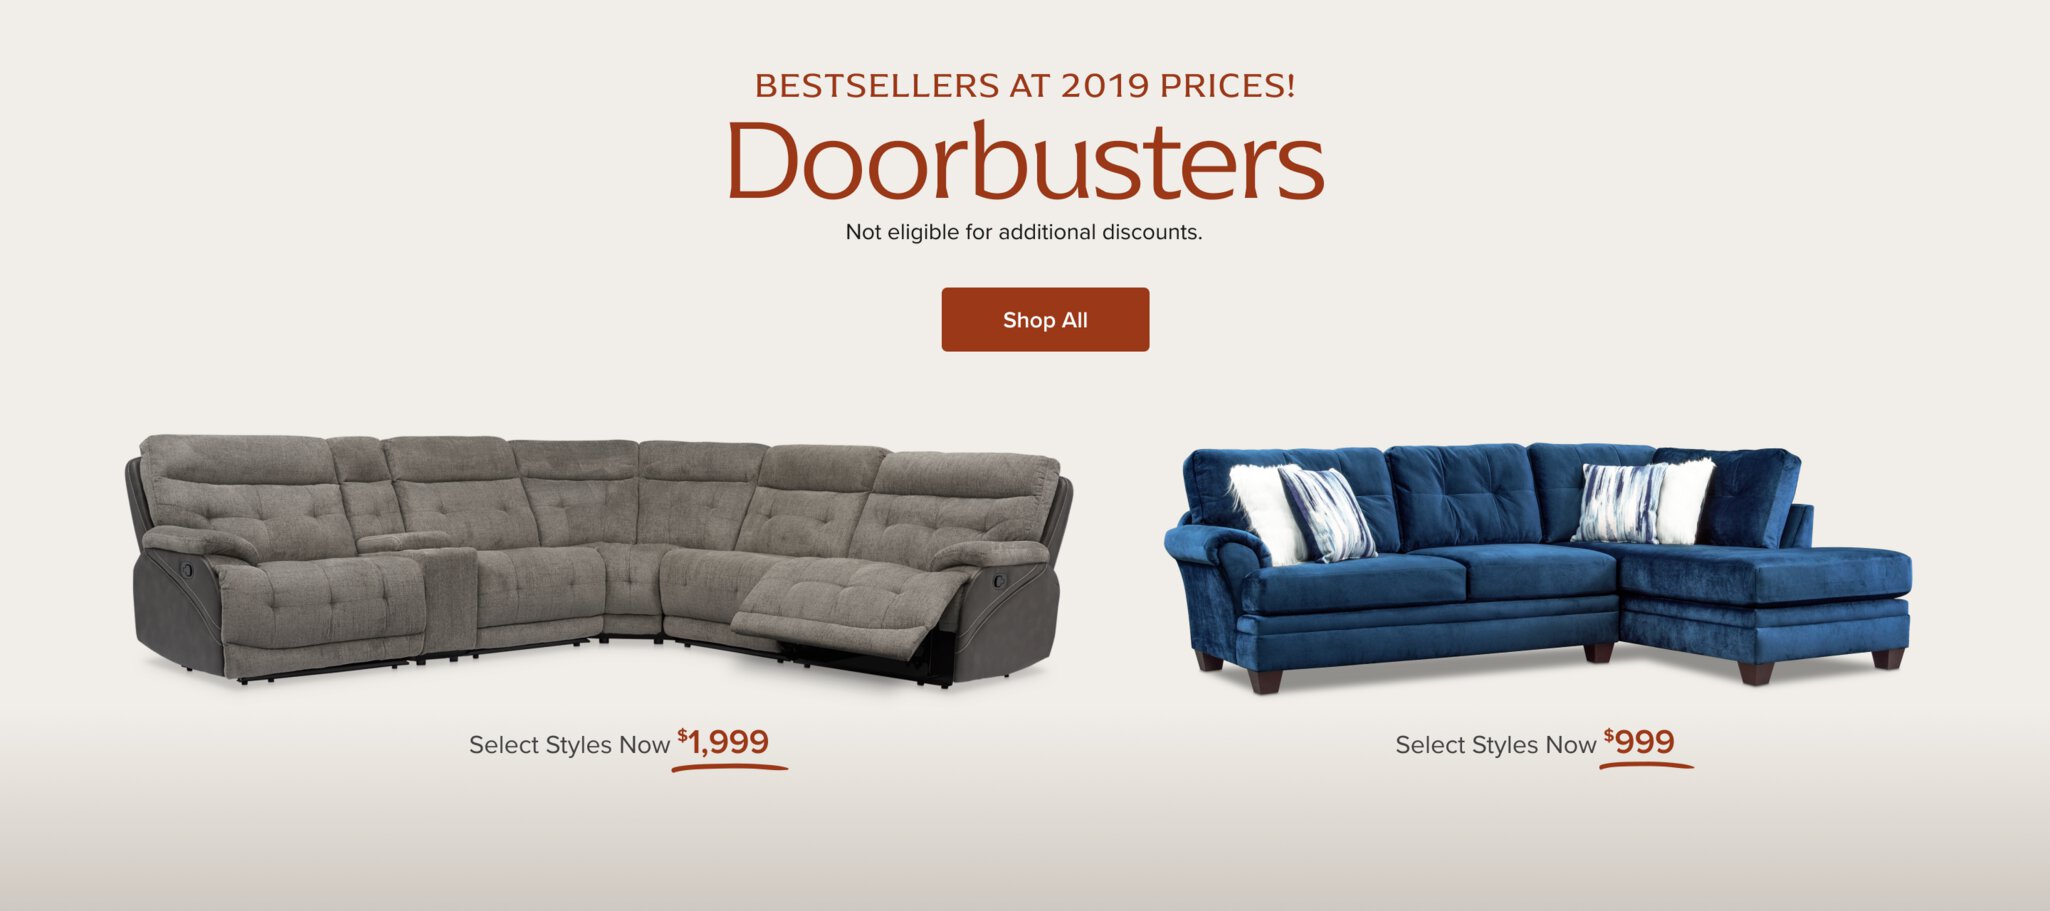 Doorbusters at 2019 Prices